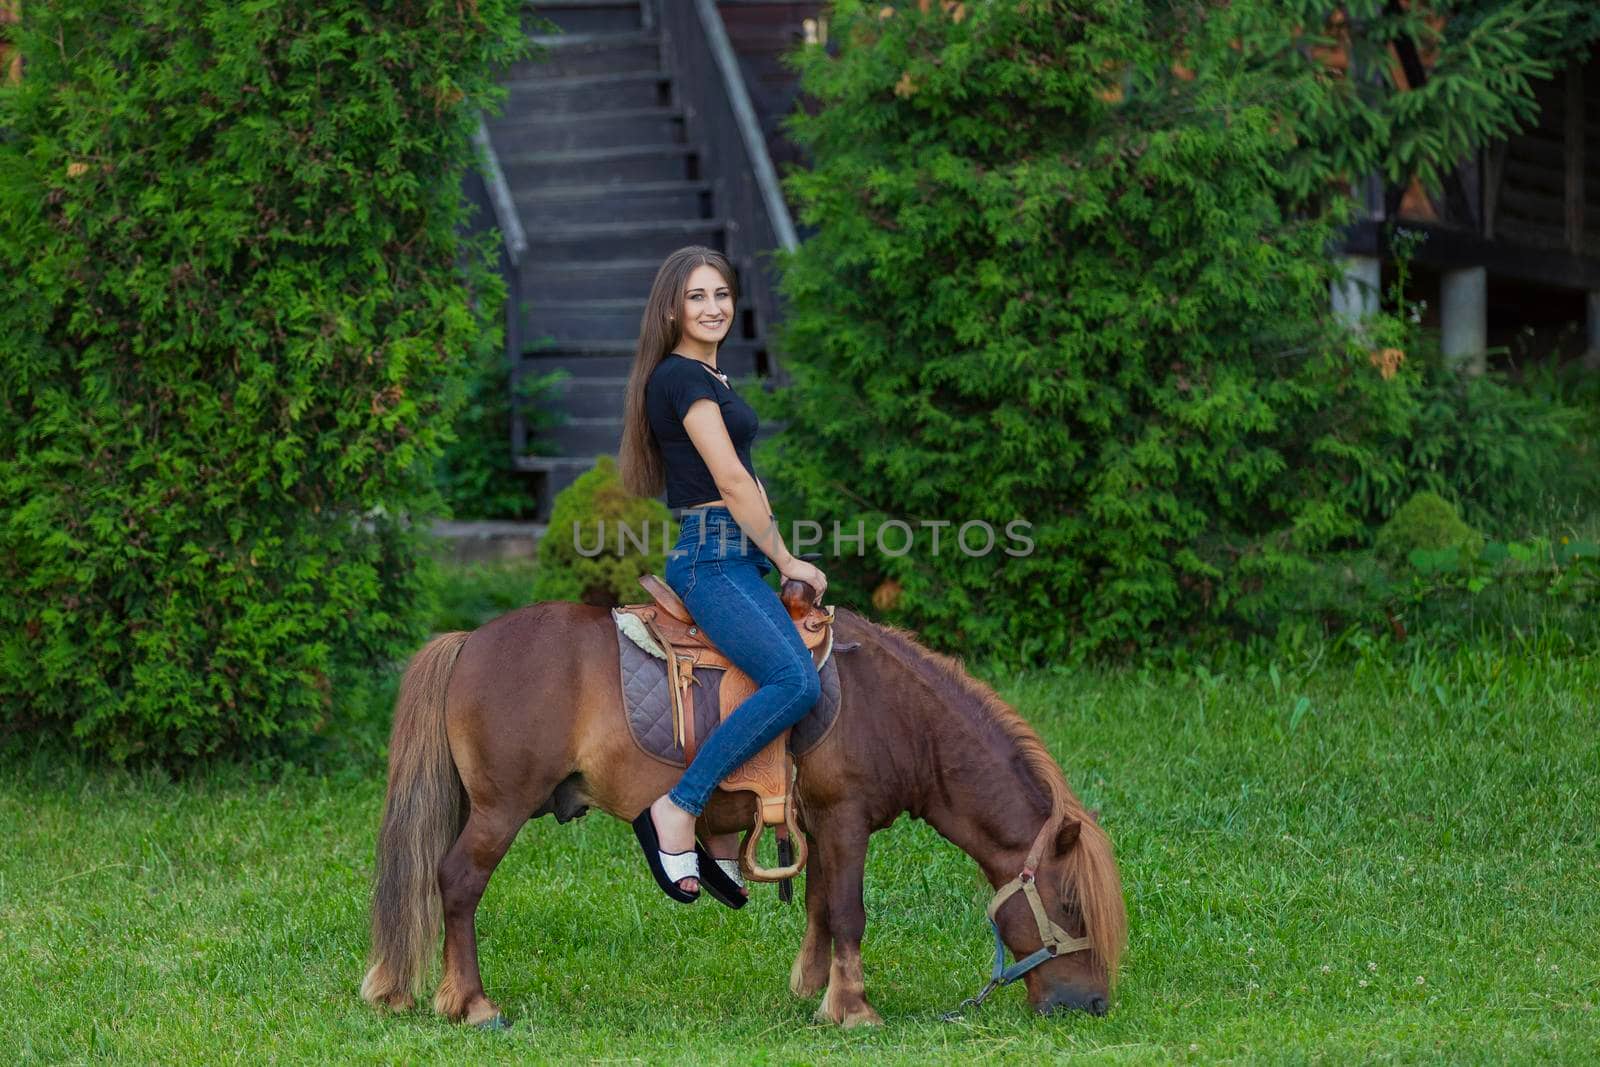 woman riding a pony on the lawn